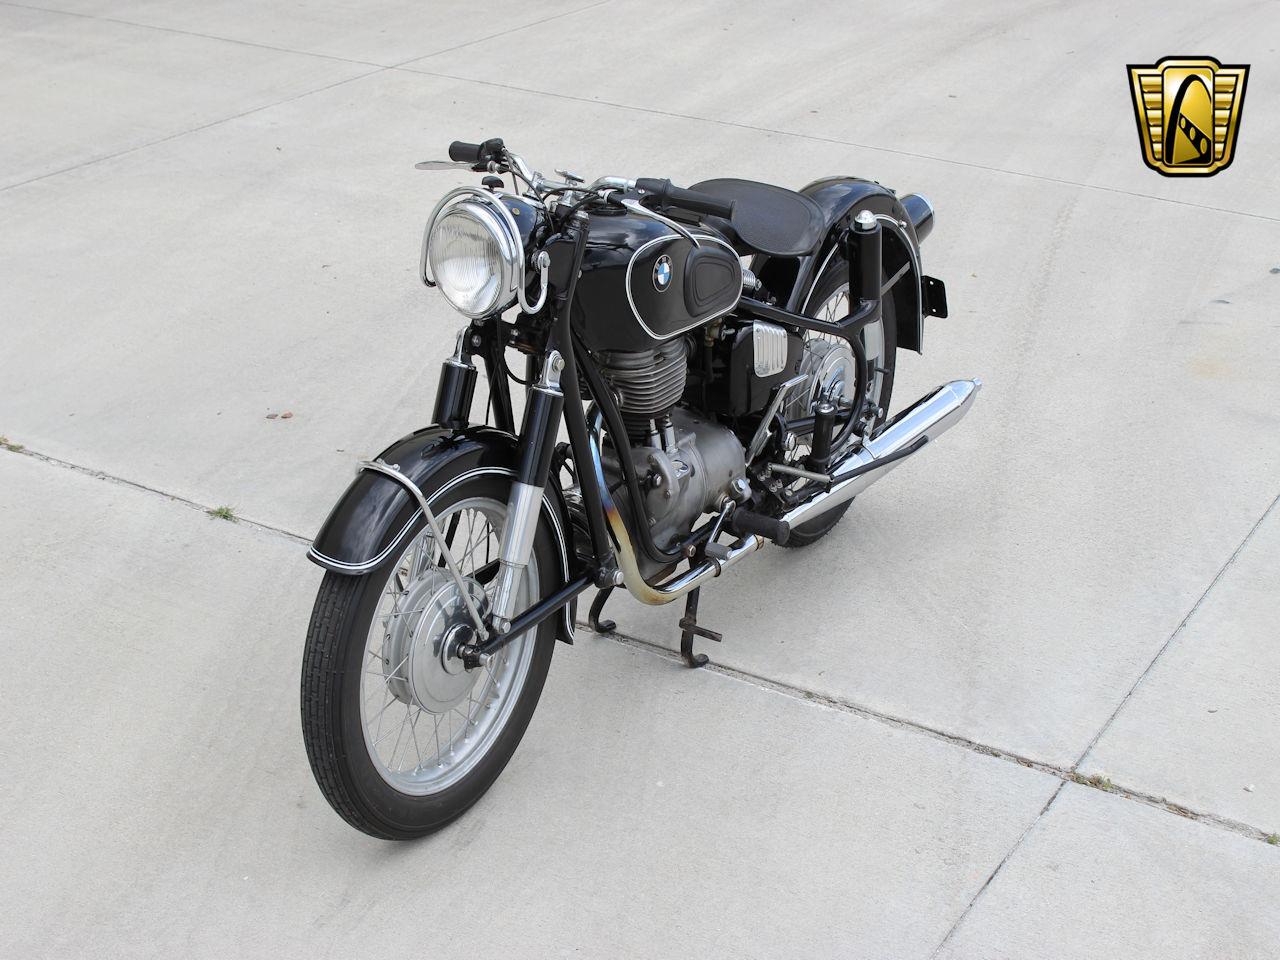 1959 BMW Motorcycle for Sale | ClassicCars.com | CC-1105212